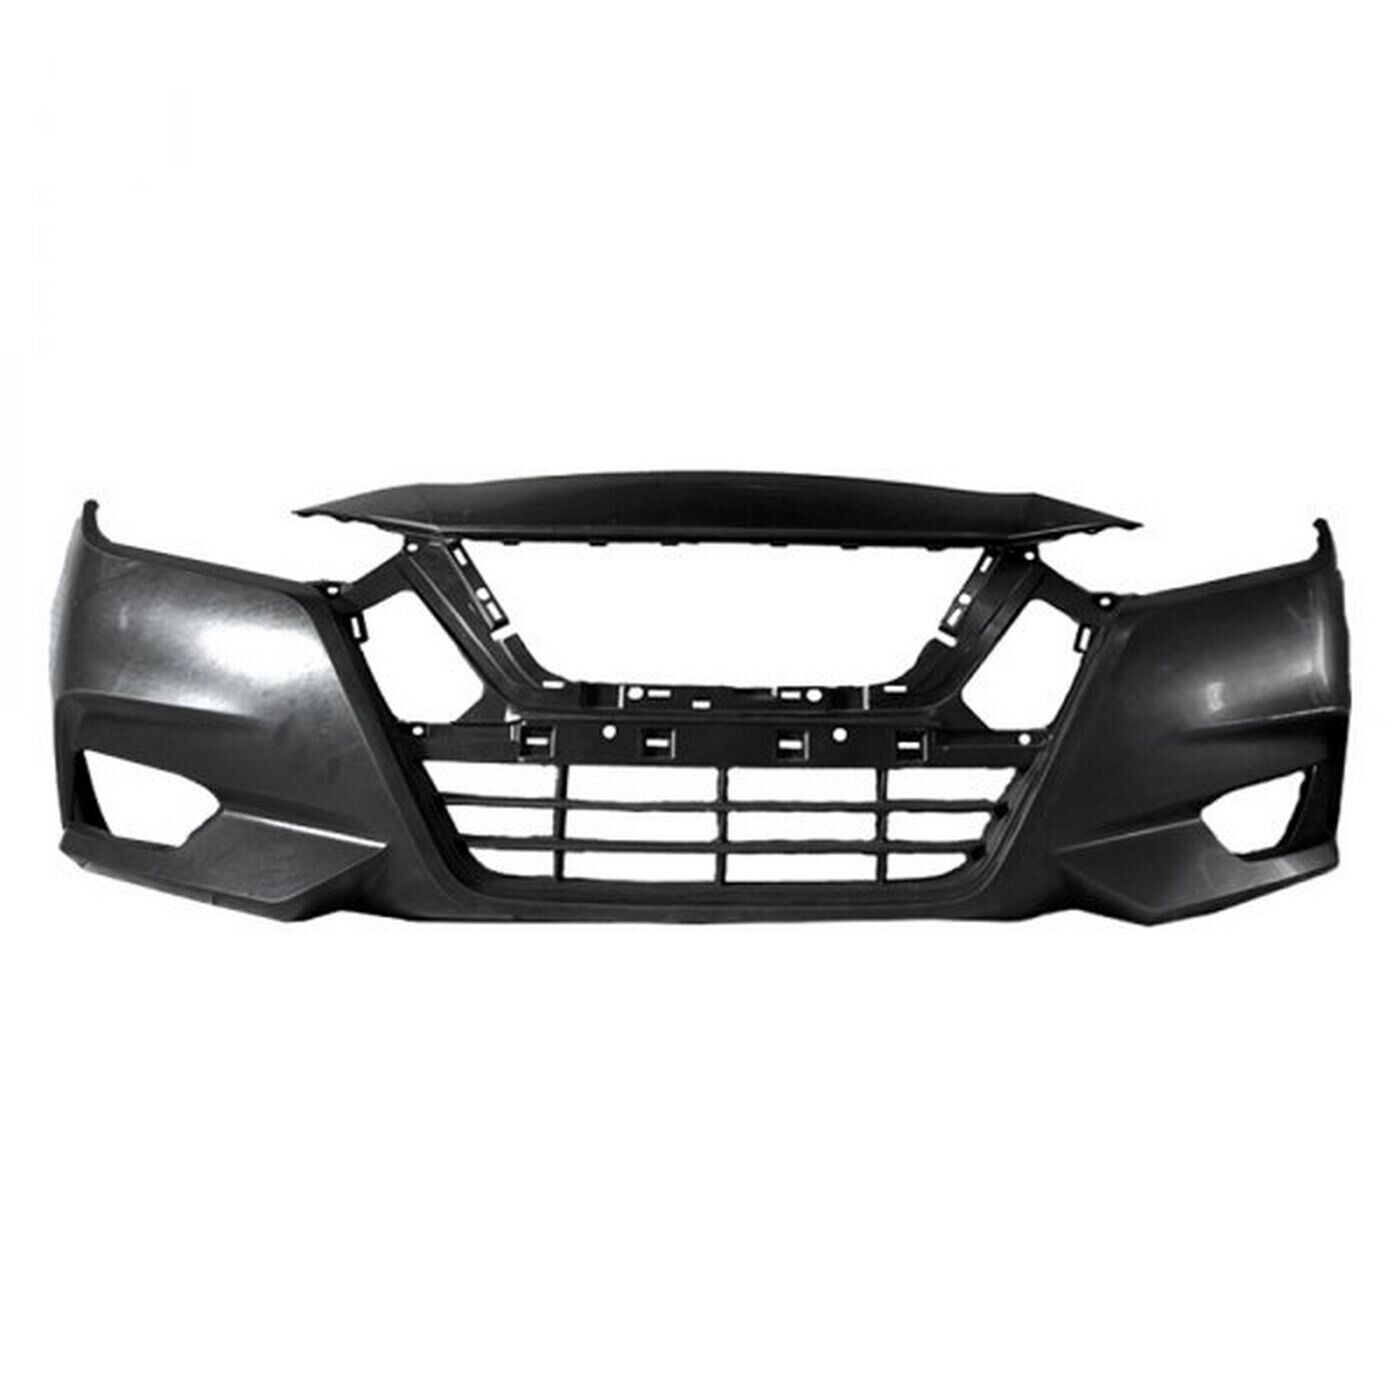 2020-2021 NISSAN VERSA; Front Bumper Cover; Painted to Match